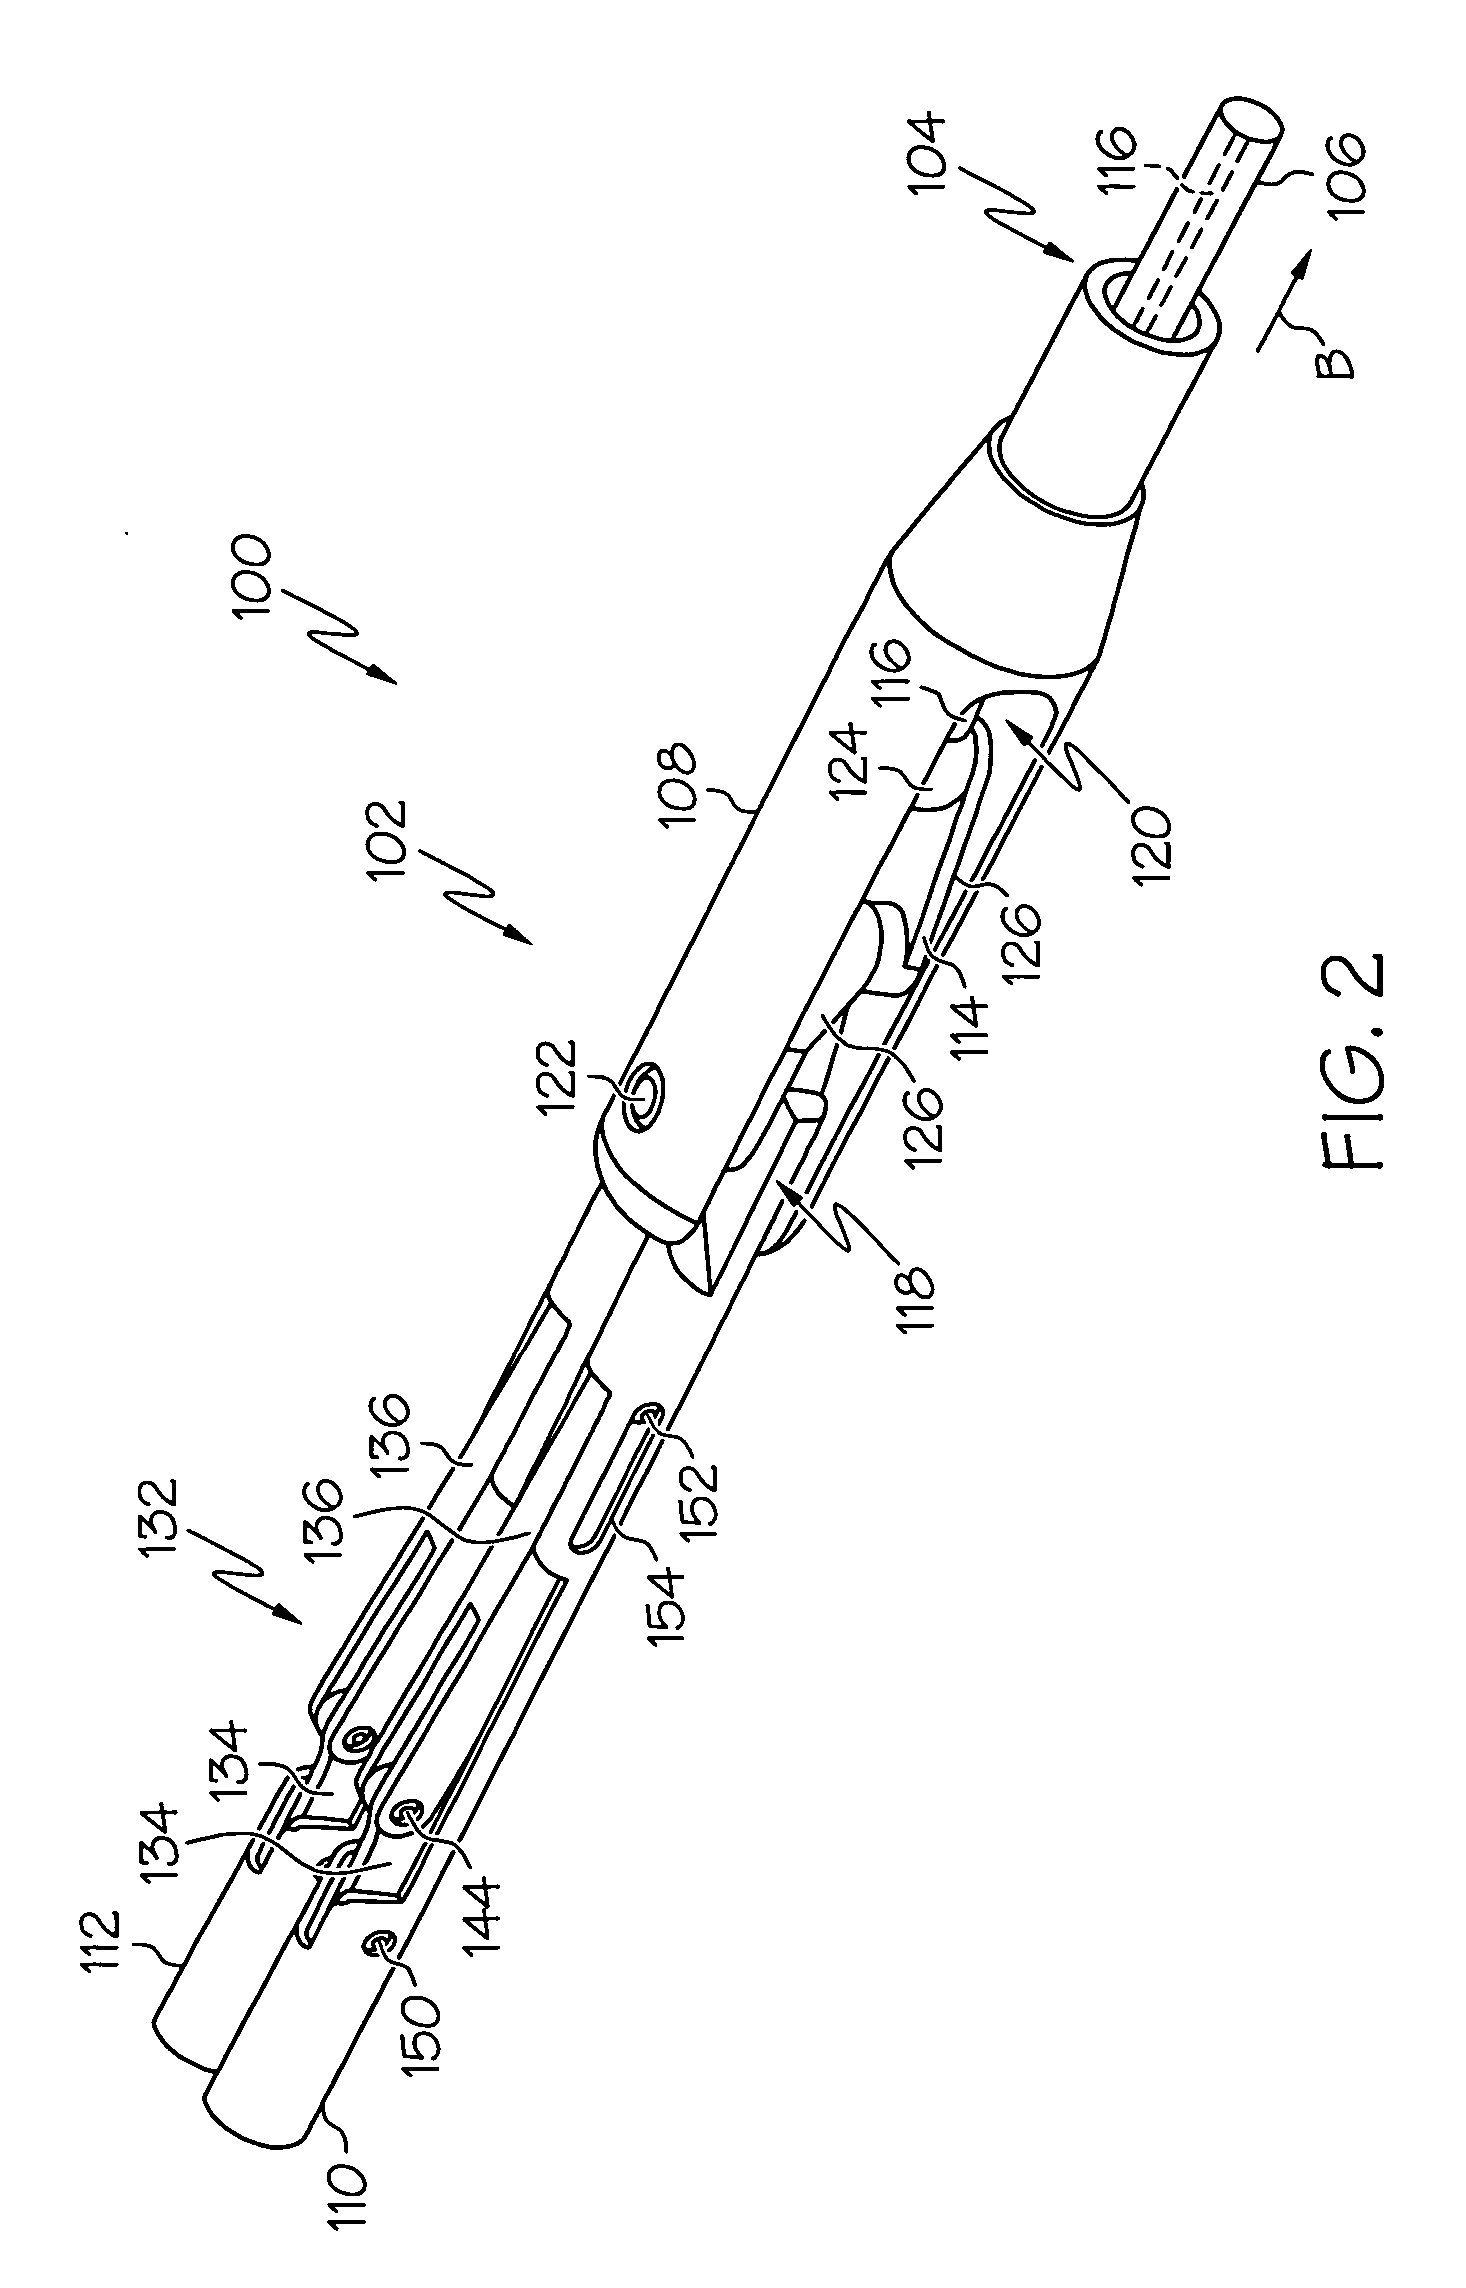 Method for performing an endoscopic mucosal resection